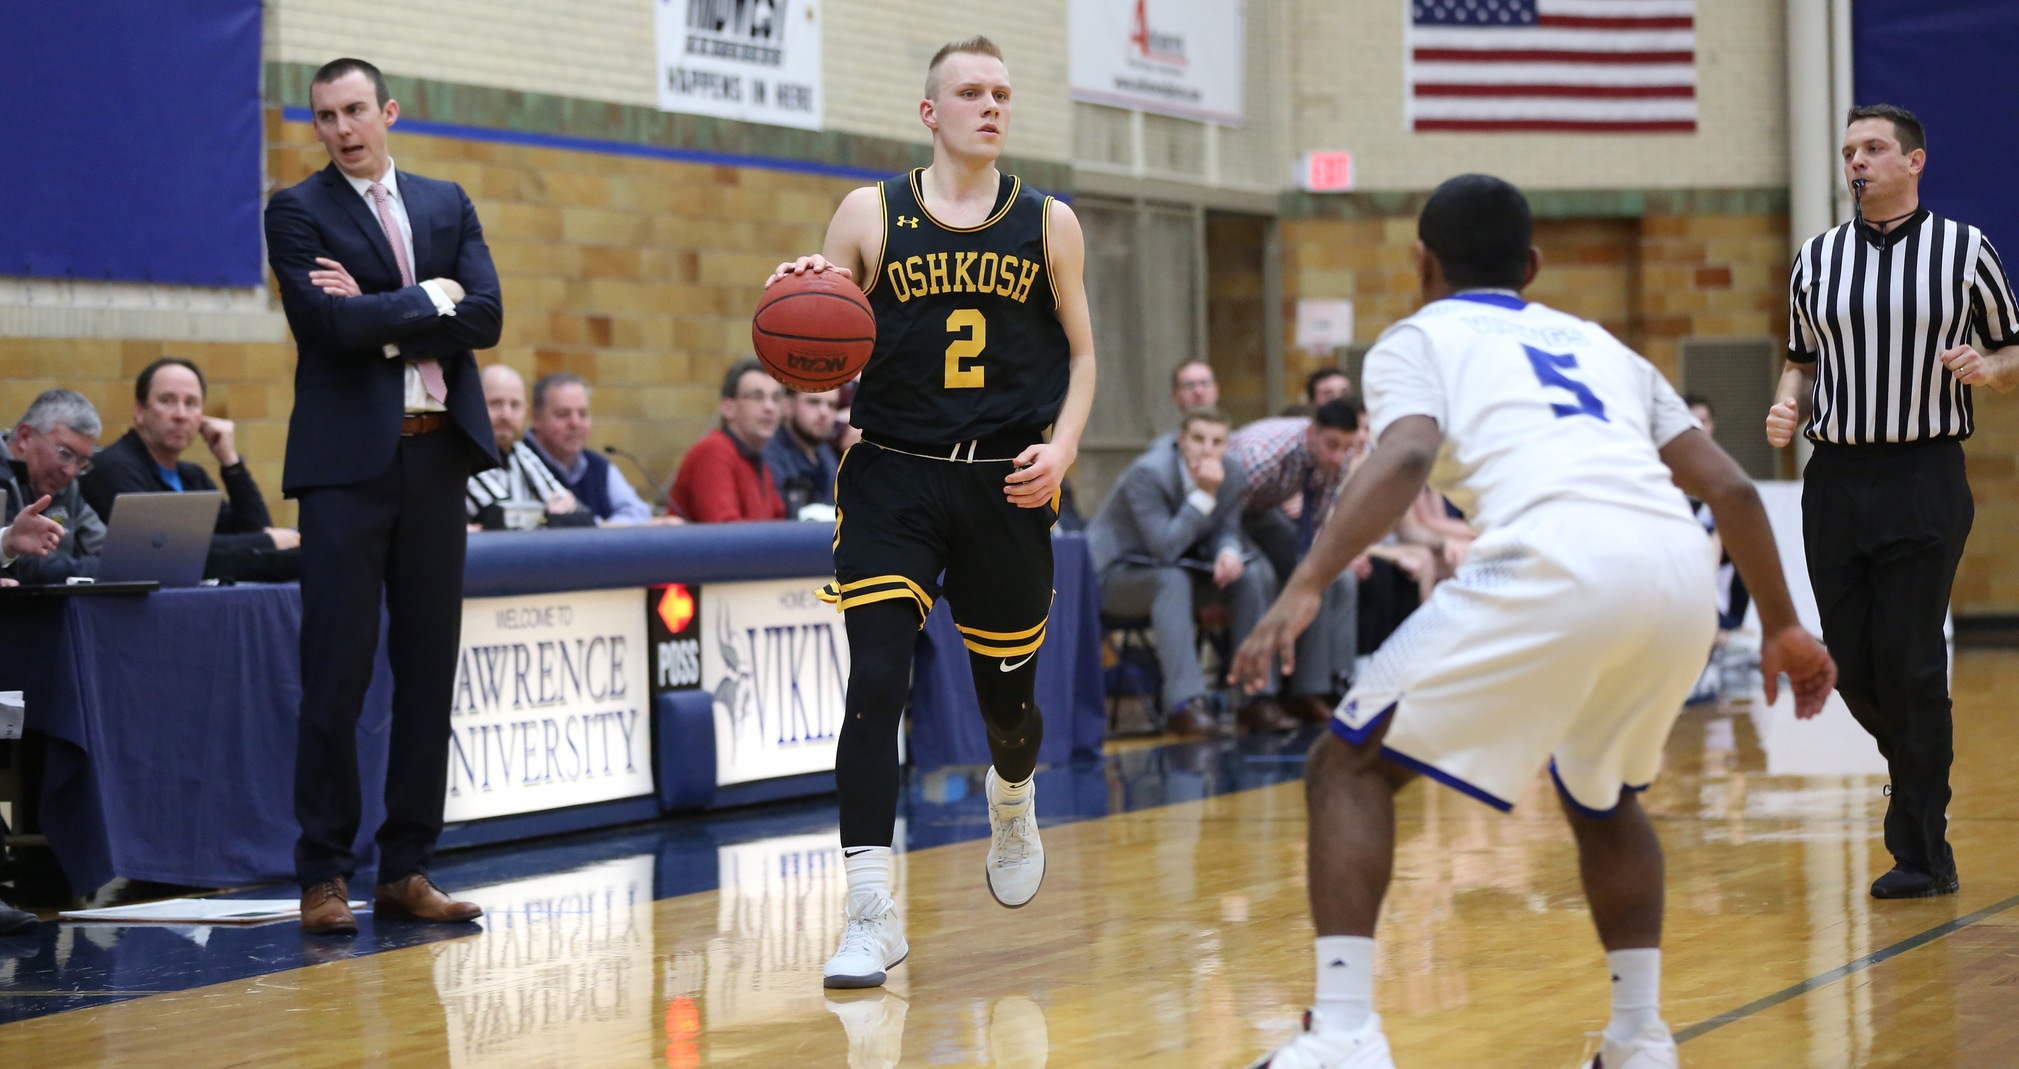 Ben Boots tallied 12 points, eight rebounds and seven assists during UW-Oshkosh's win over Lawrence University.